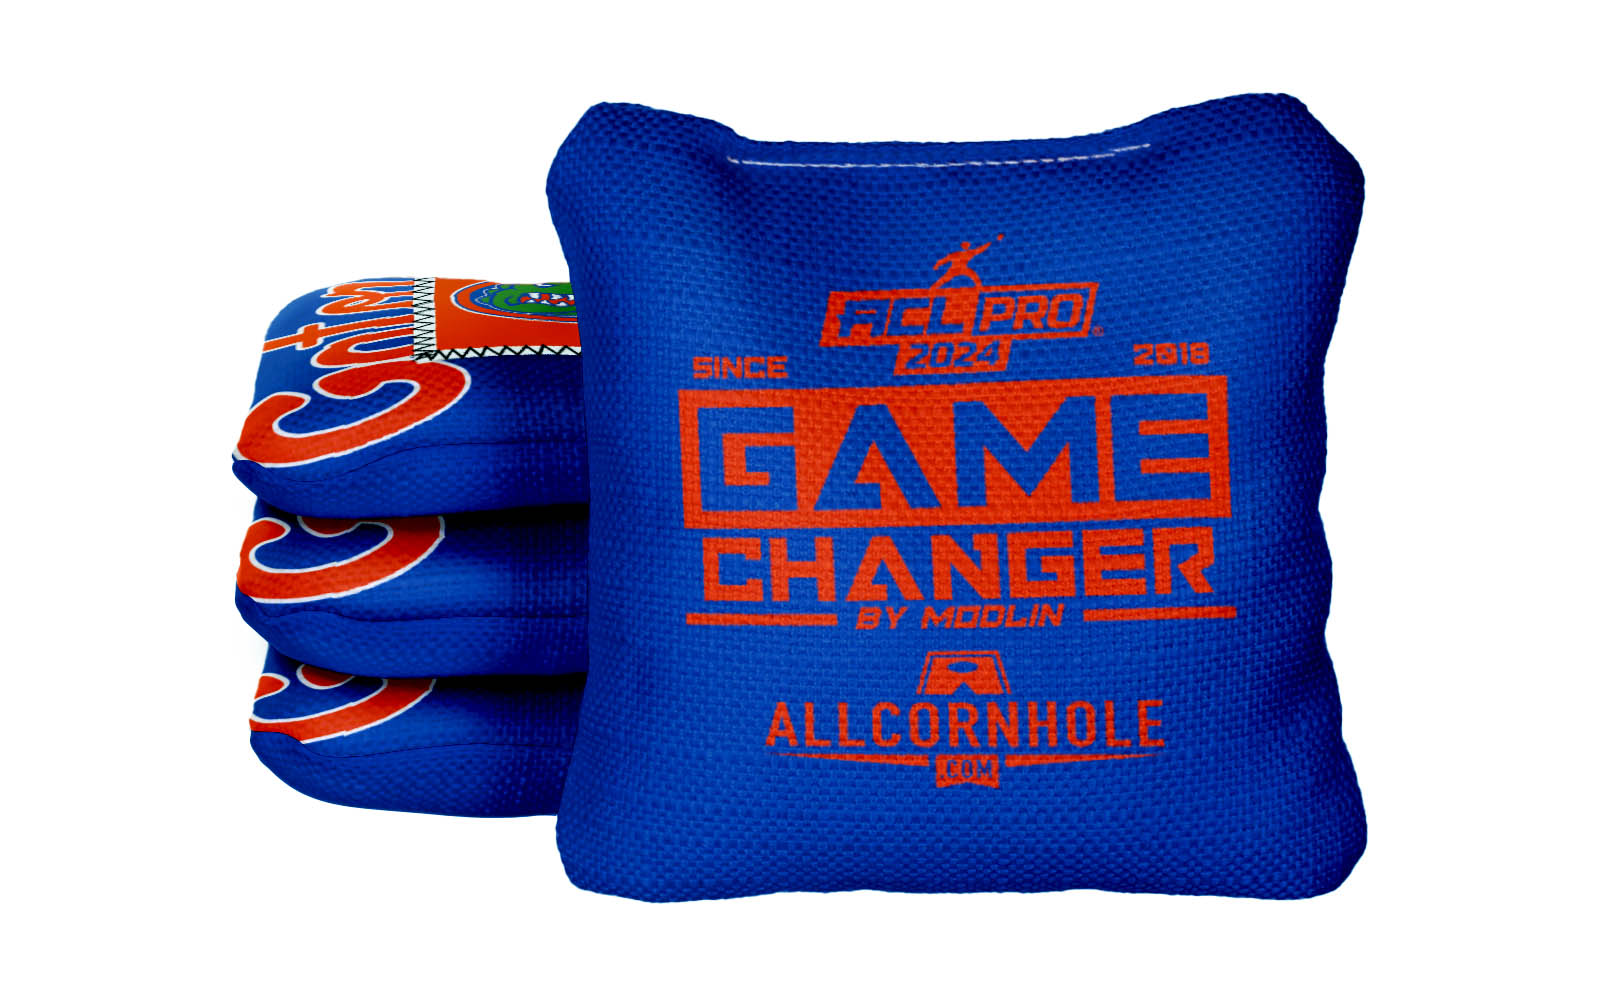 Officially Licensed Collegiate Cornhole Bags - Gamechangers - Set of 4 - University of Florida